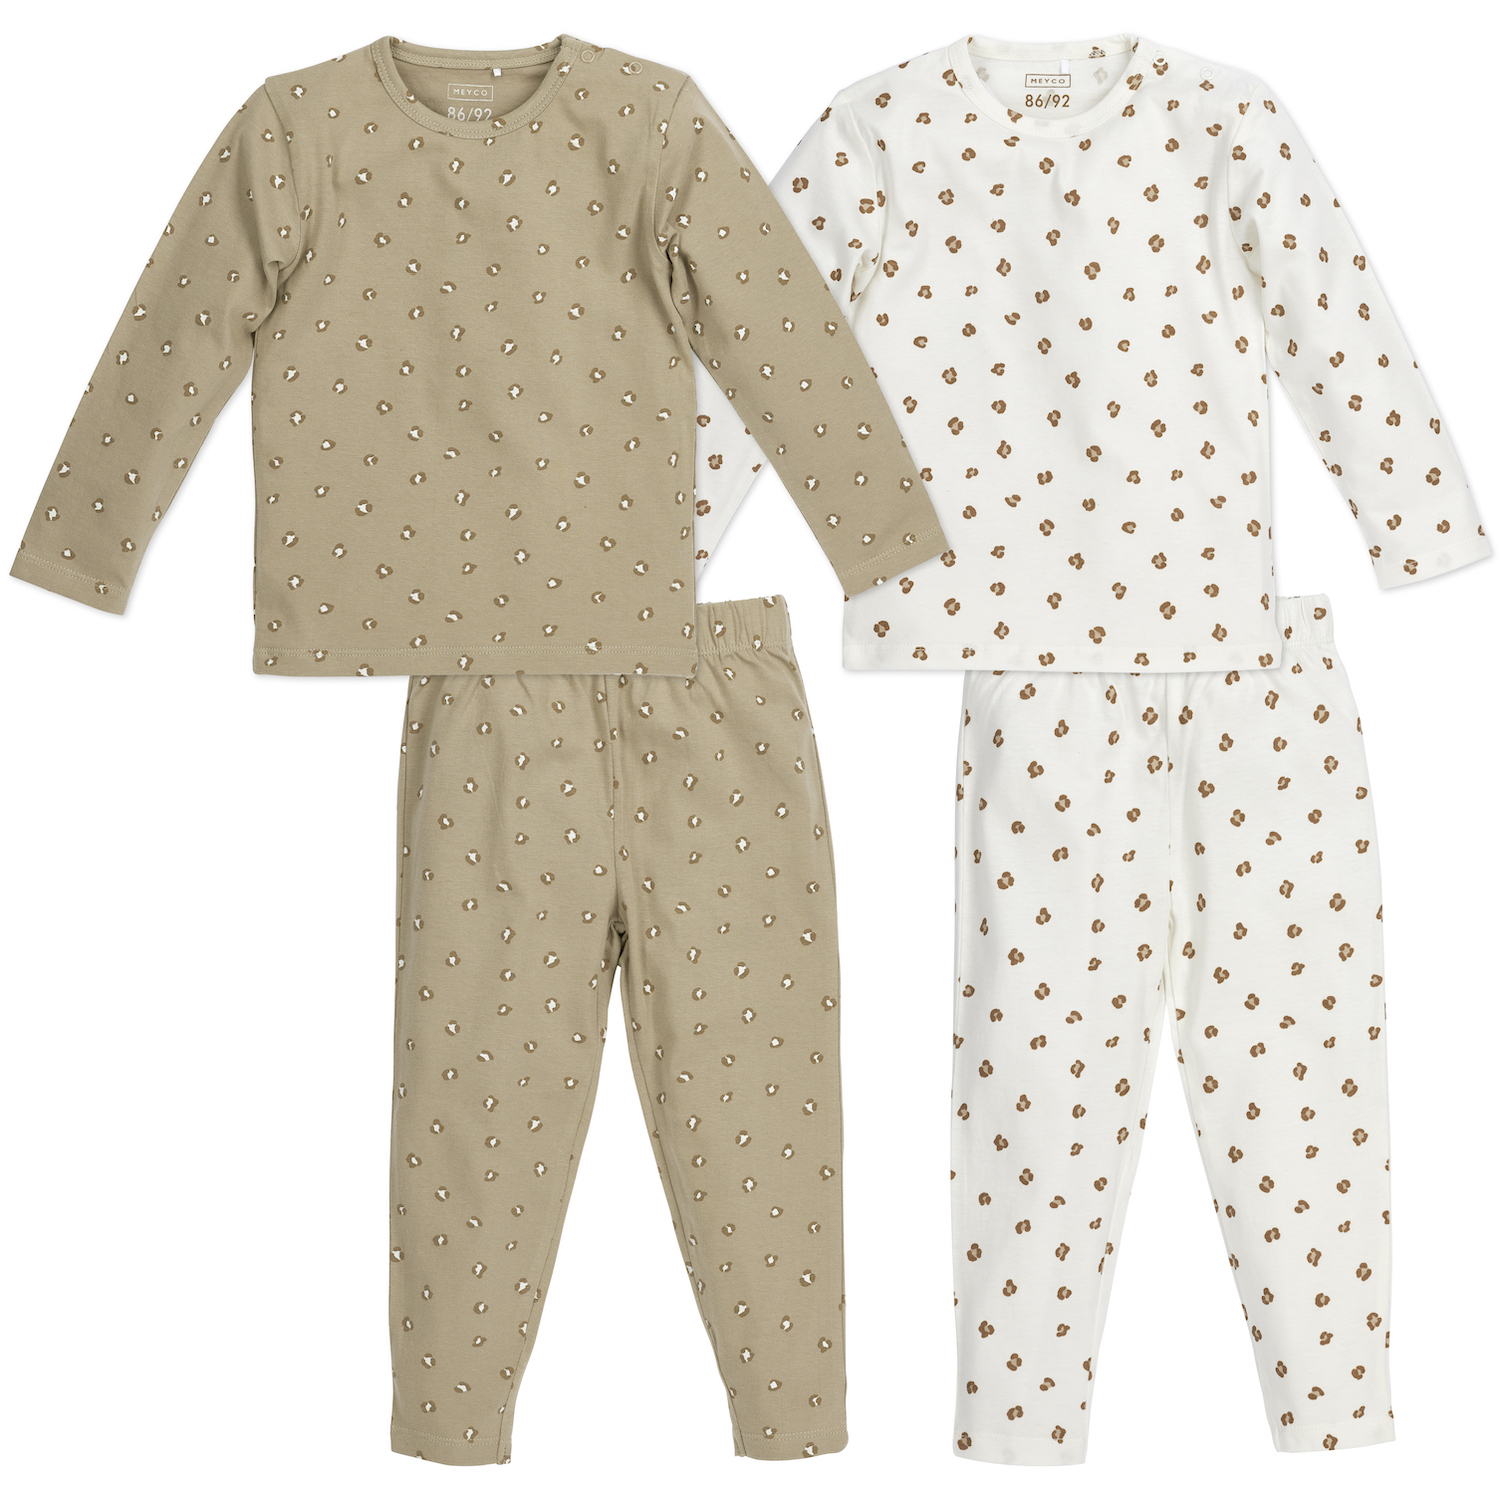 Pajamas 2-pack Mini Panther - Offwhite/Sand - Size 98/104